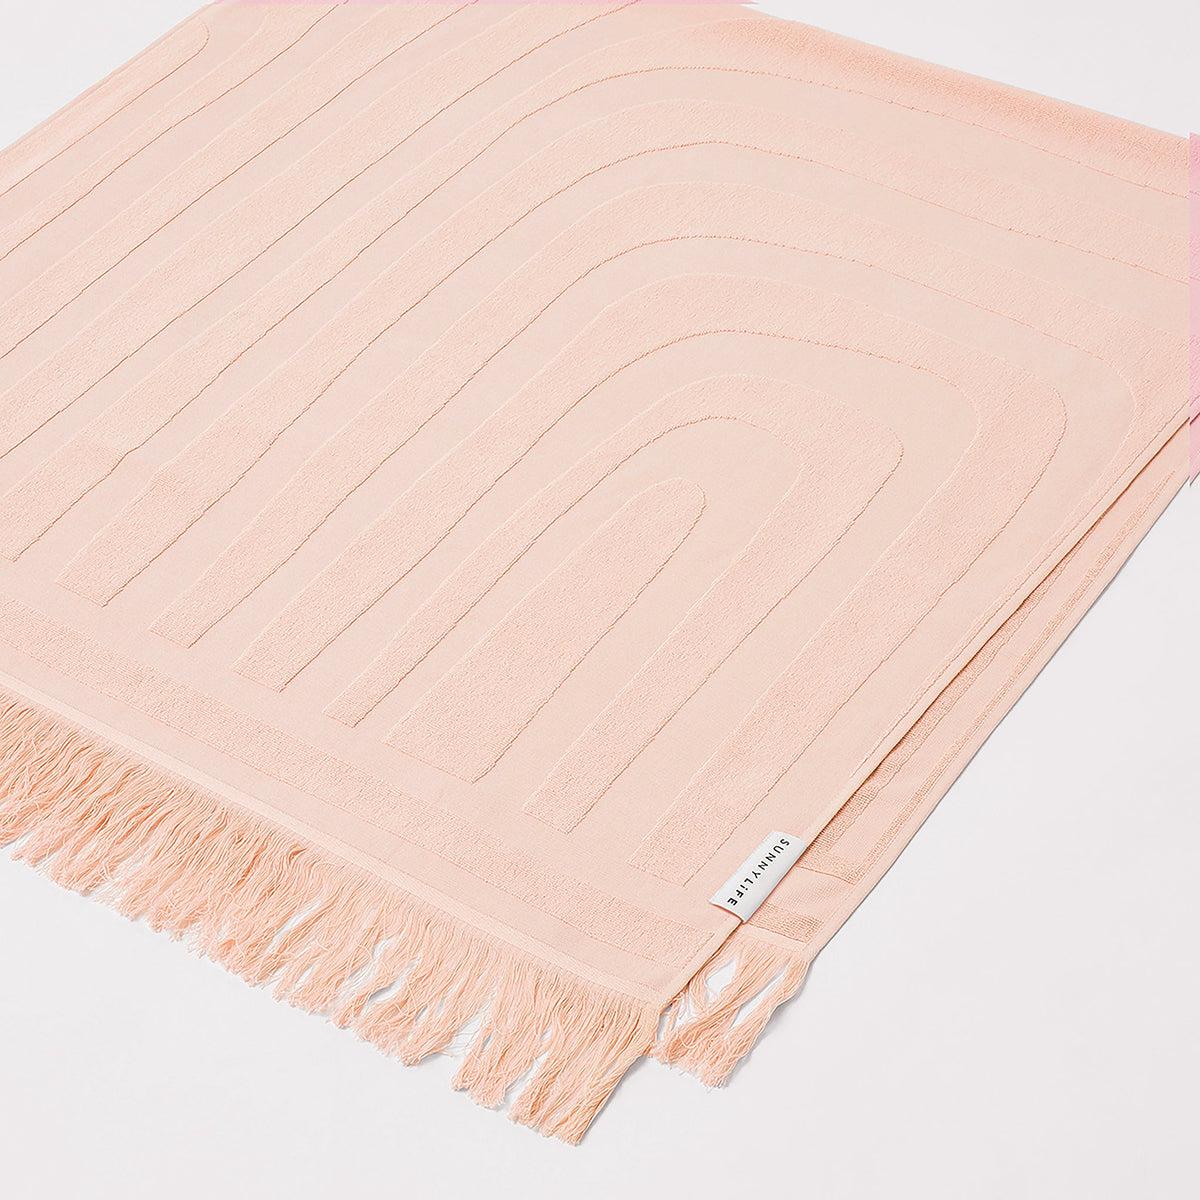 Luxe Towel - Salmon-Travel & Outdoors-Sunny Life-The Bay Room